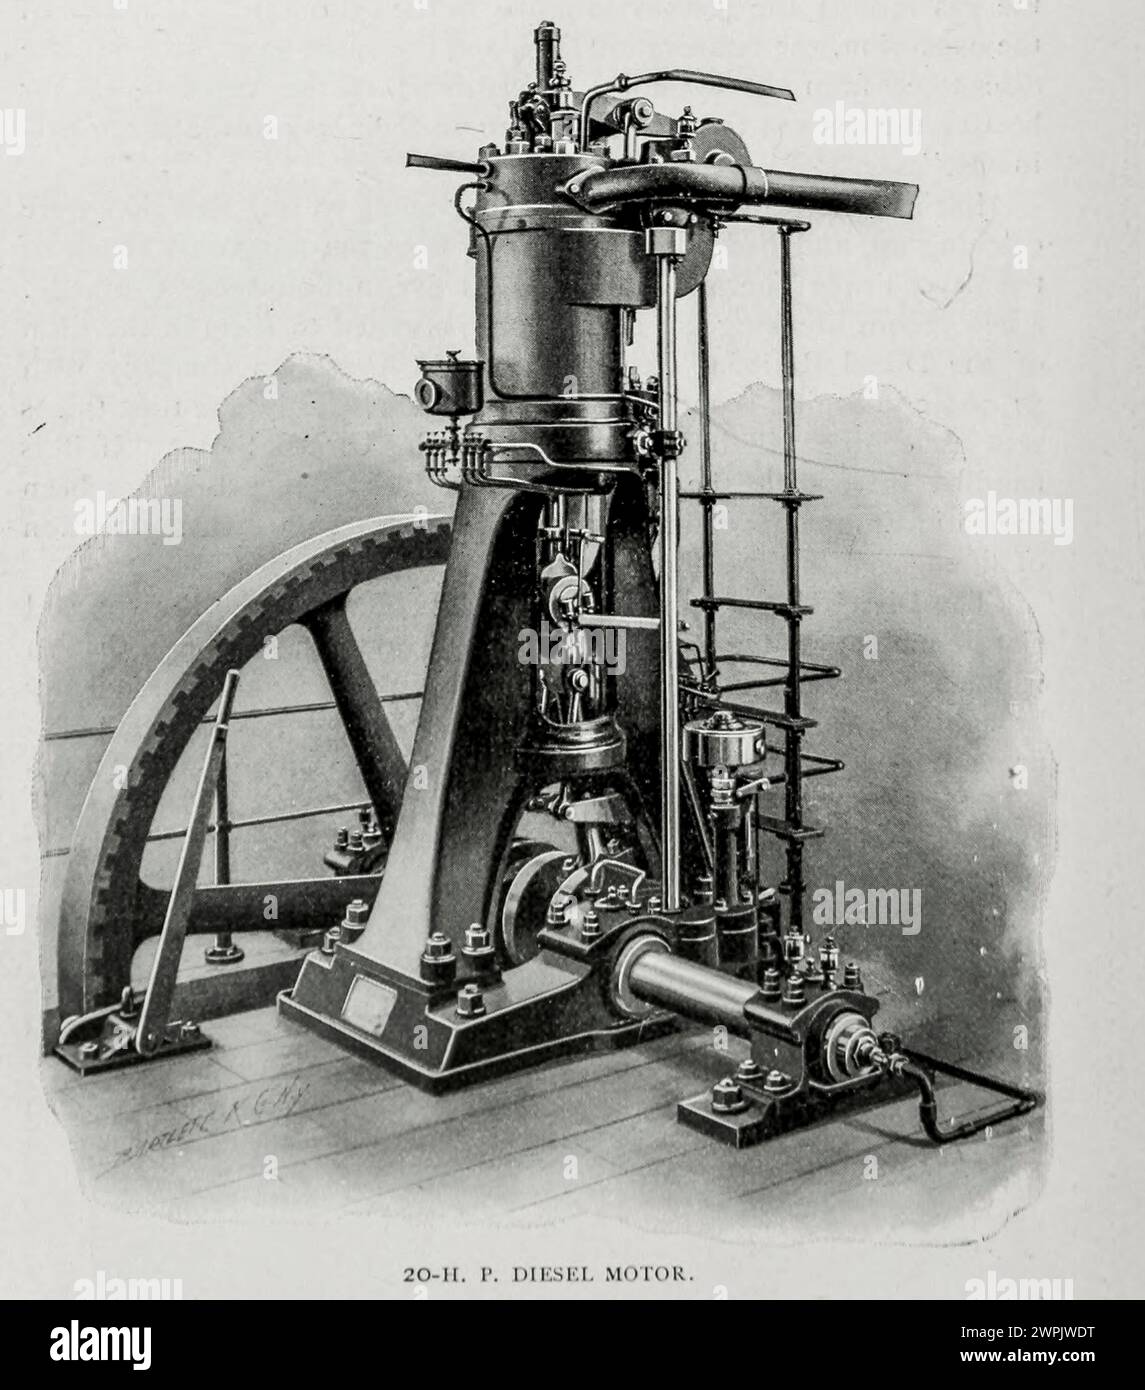 20 H. P. Diesel Motor from the Article THE GAS ENGINE IN AMERICAN PRACTICE. By George Richmond from The Engineering Magazine Devoted to Industrial Progress Volume XV 1898 The Engineering Magazine Co Stock Photo